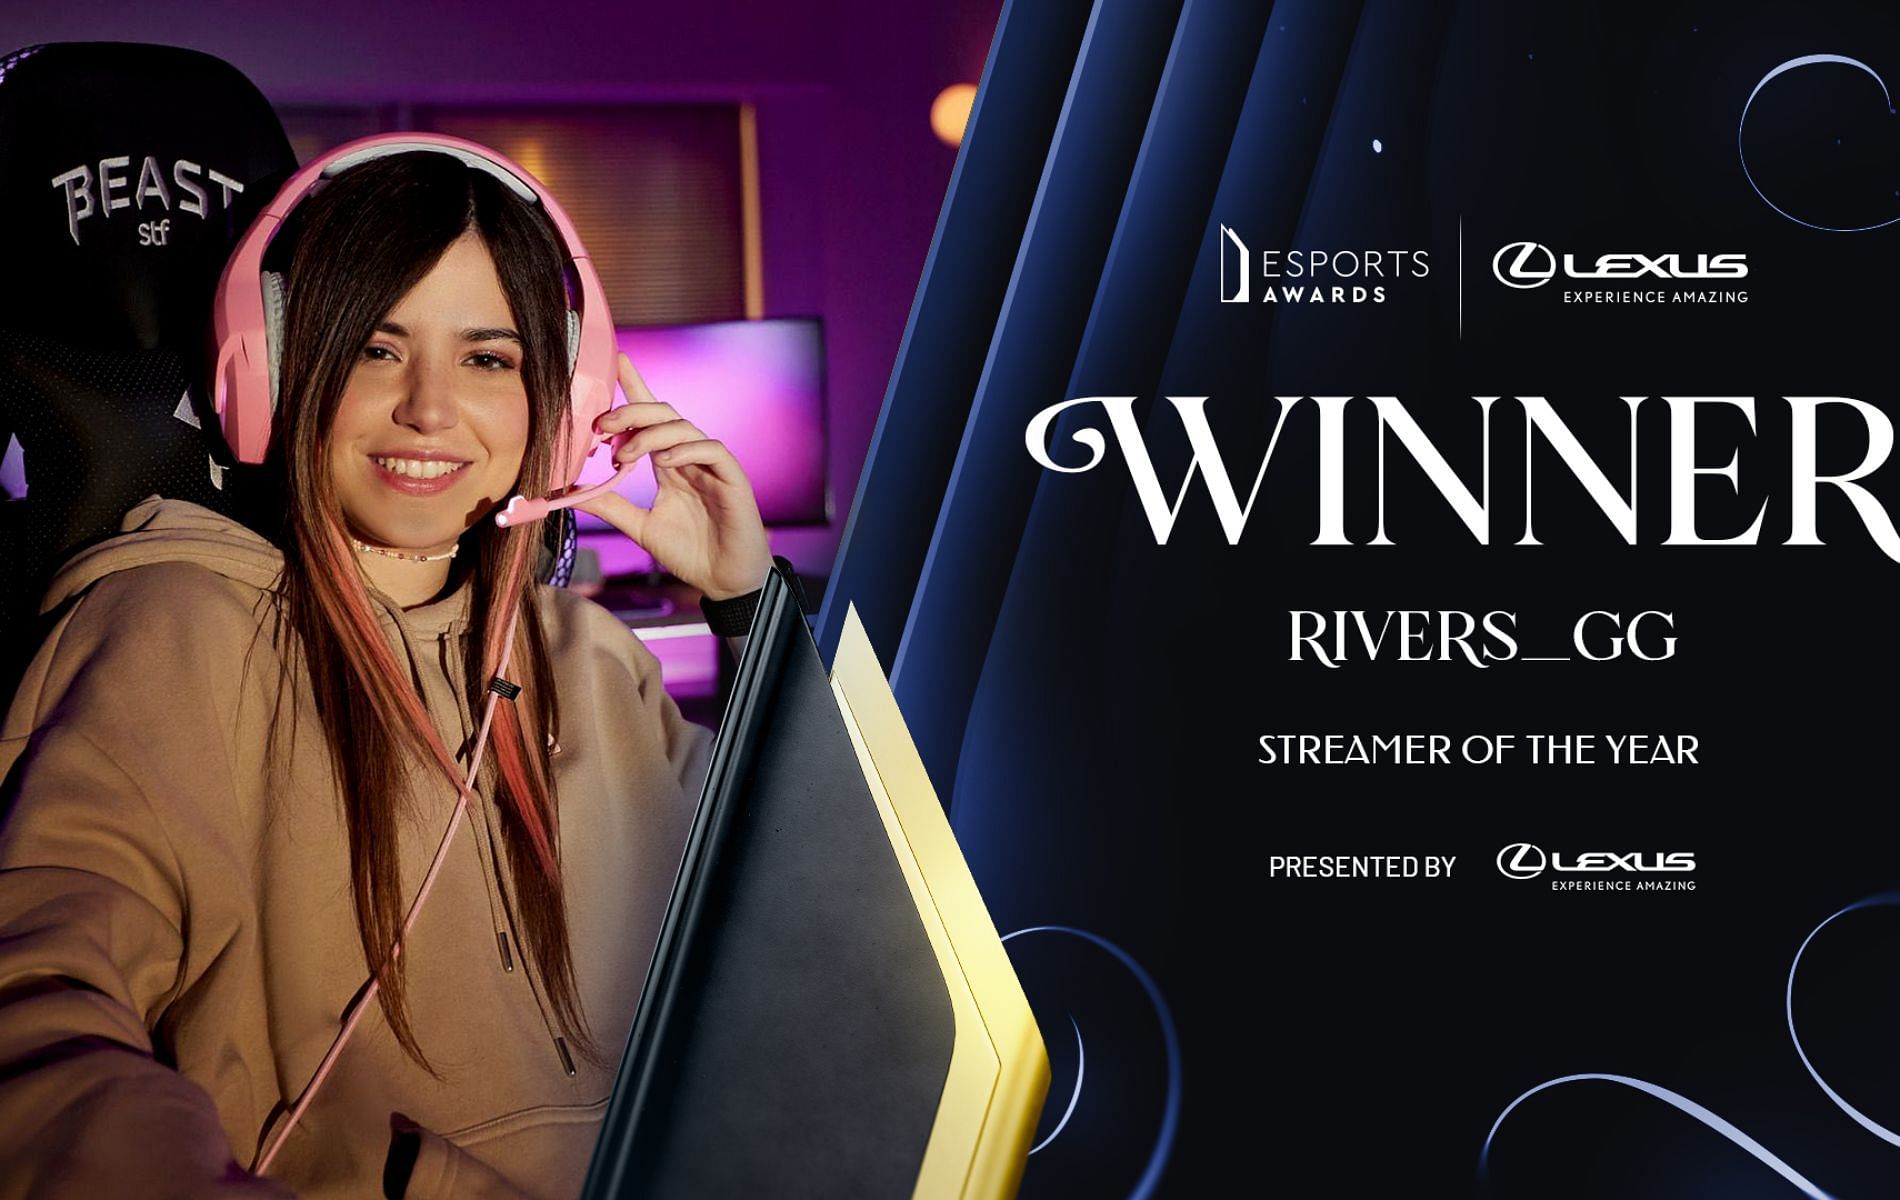 Who is Rivers? Everything about Twitch star who won Streamer of the